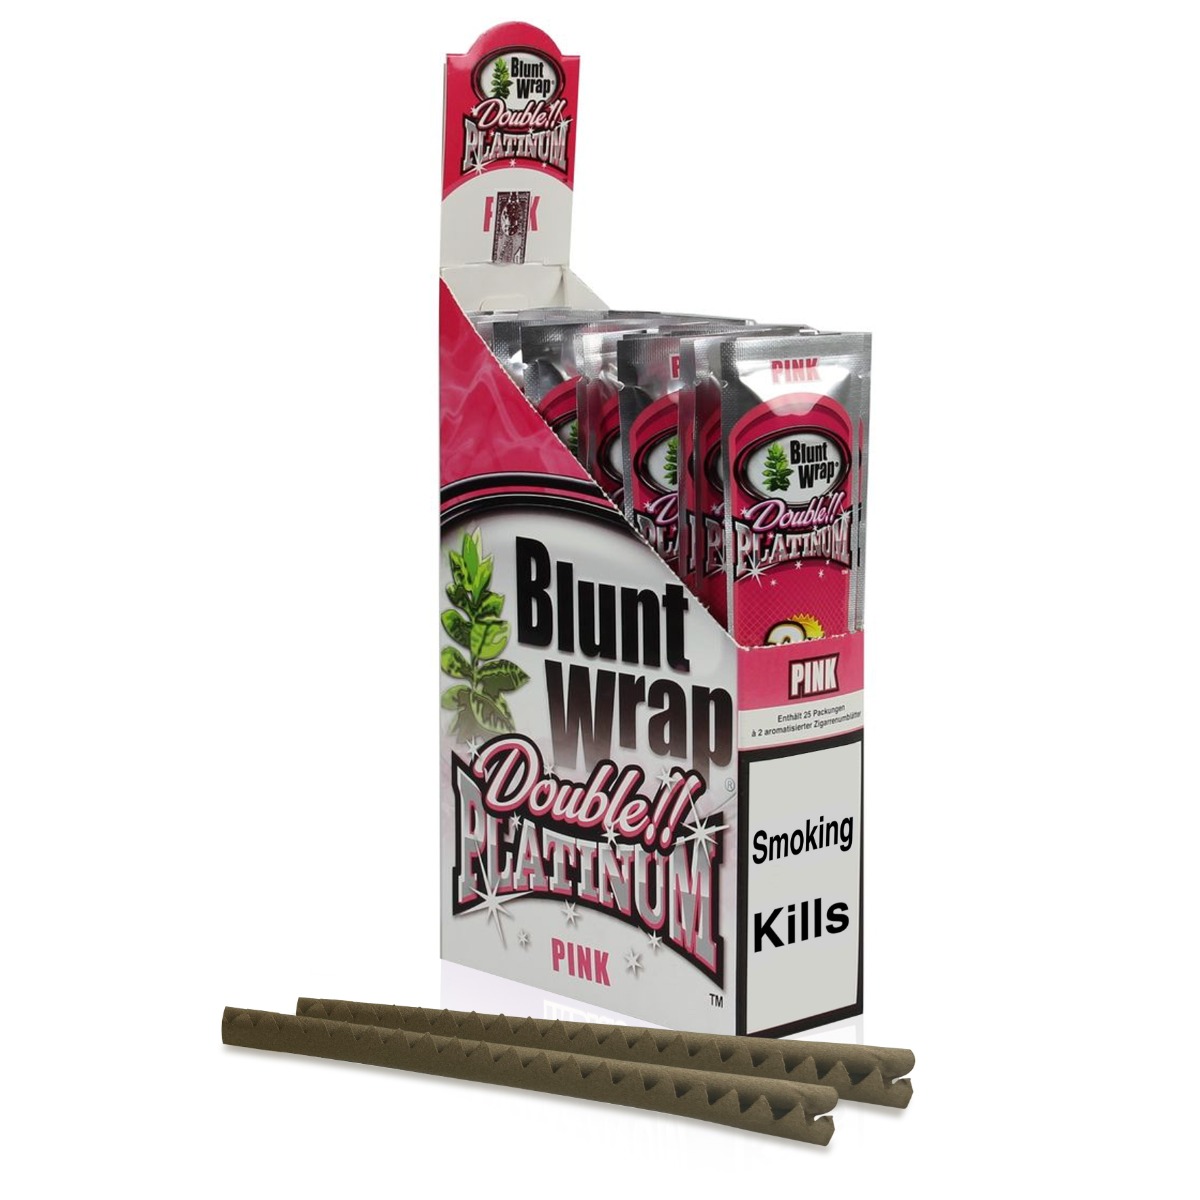 Blunt wrap double platinum - Pink ( Previously bubblegum) - pack of 2